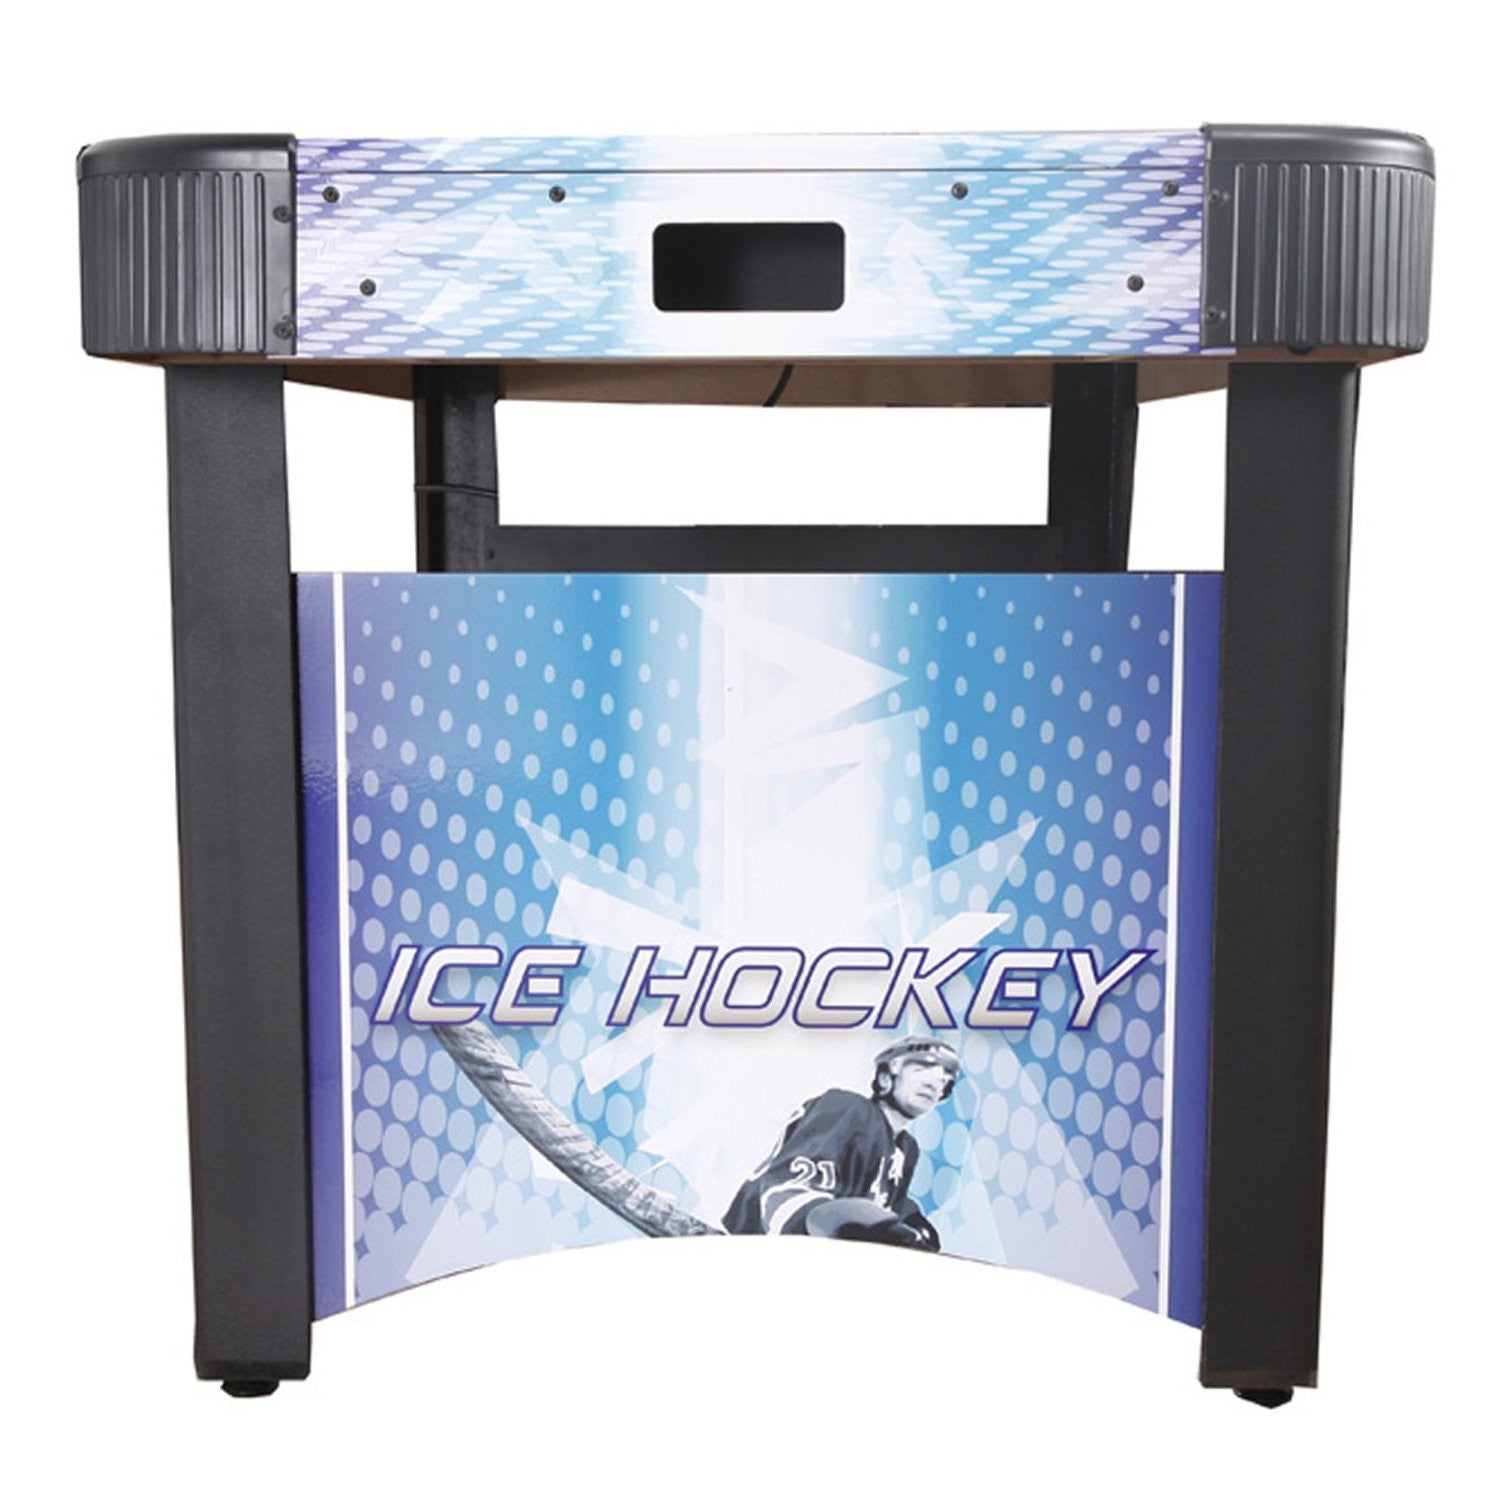 Hathaway 5' Face-Off Air Hockey Table with Elec. Scoring